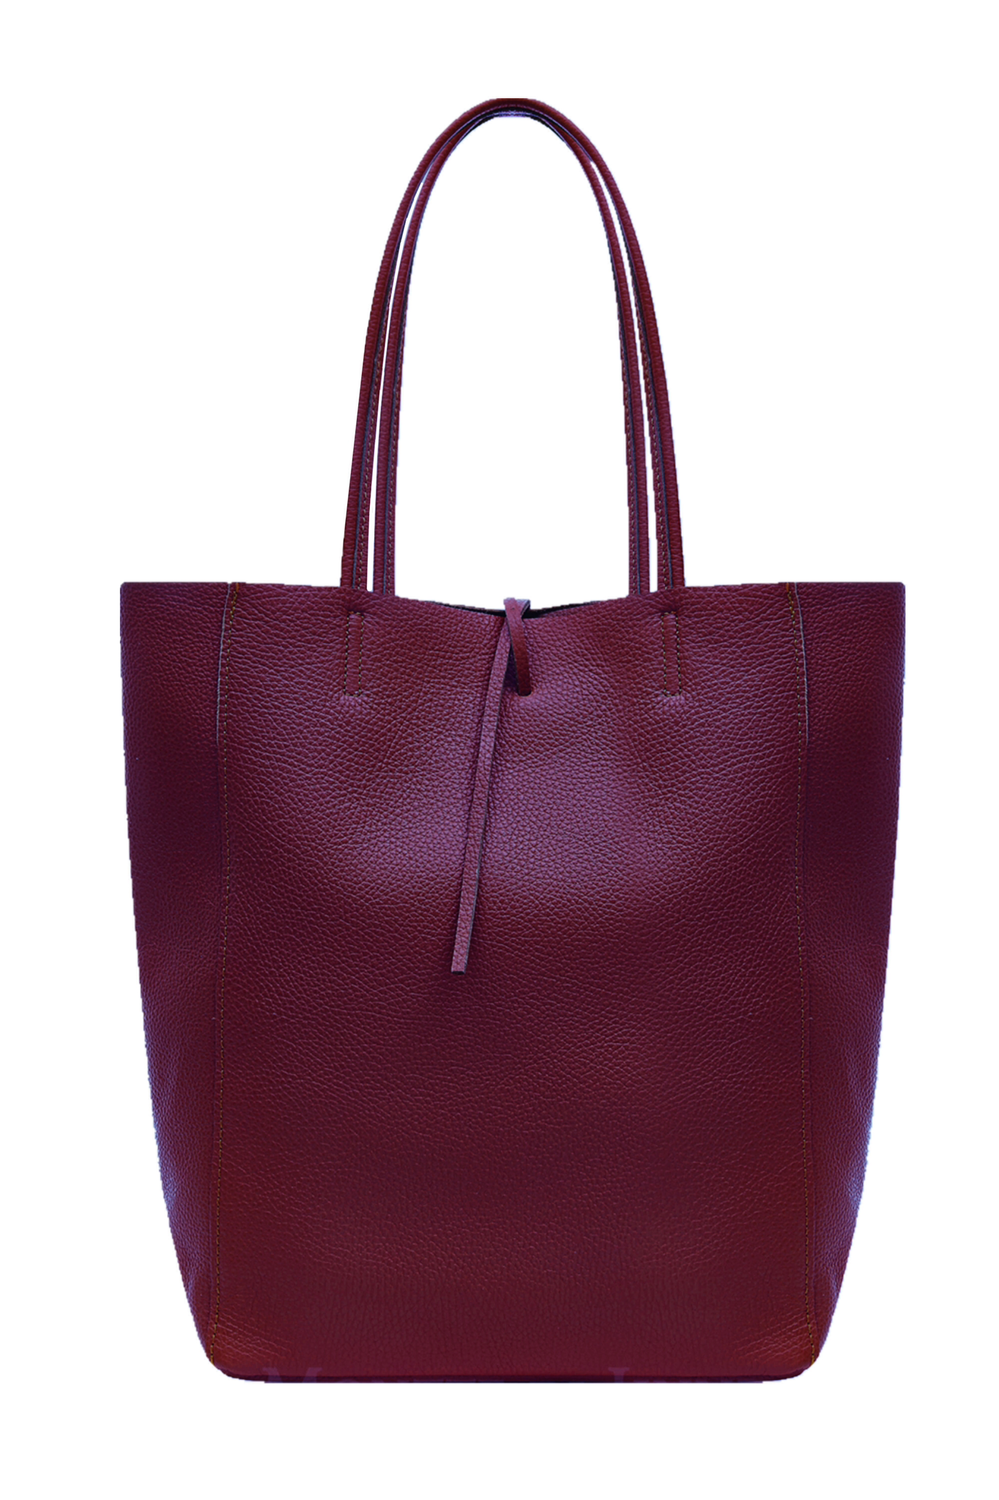 Berry Red Textured Leather Shopper Bag